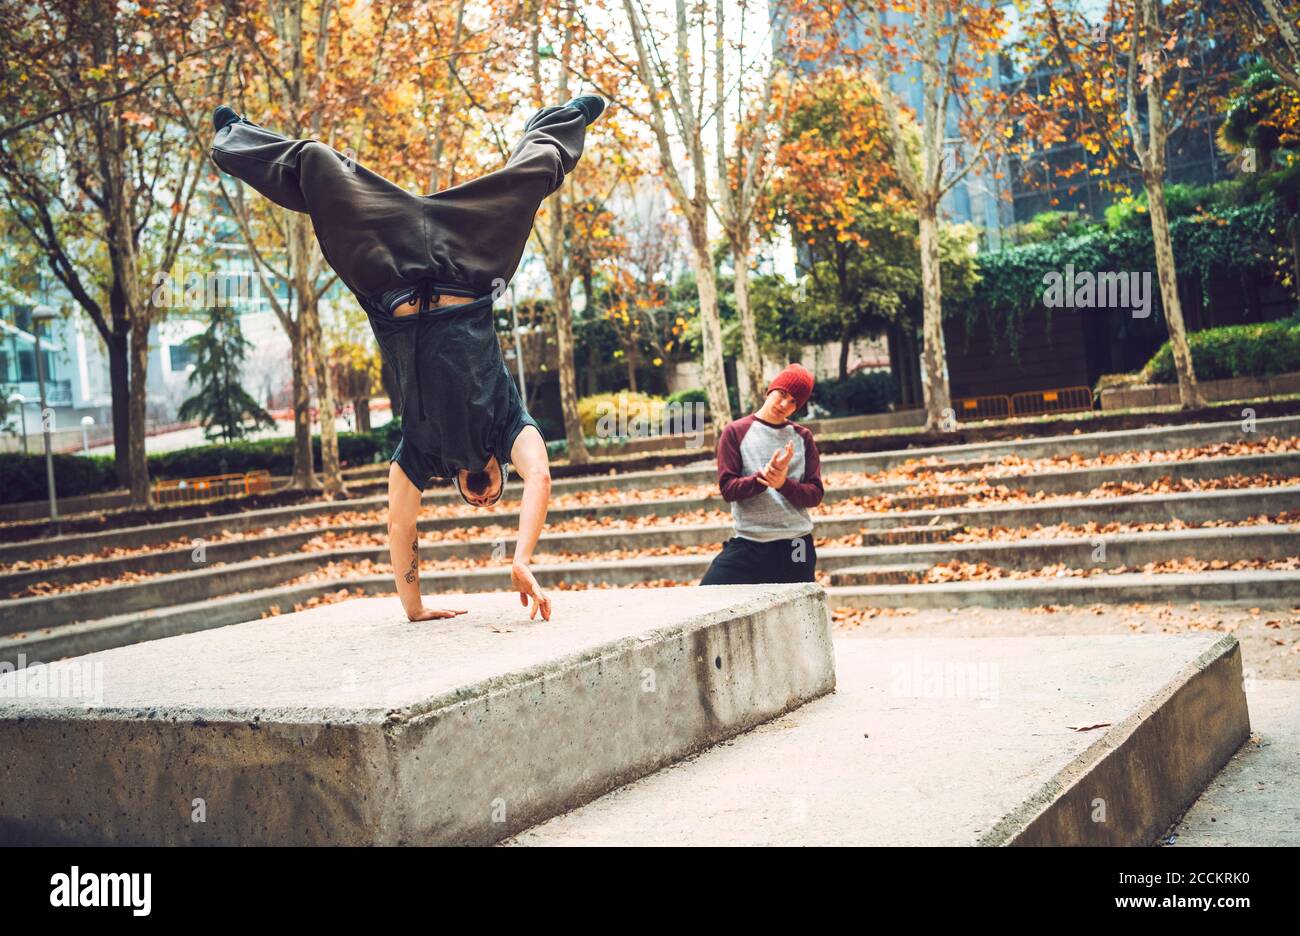 Young man performing handstand by friend in park Stock Photo